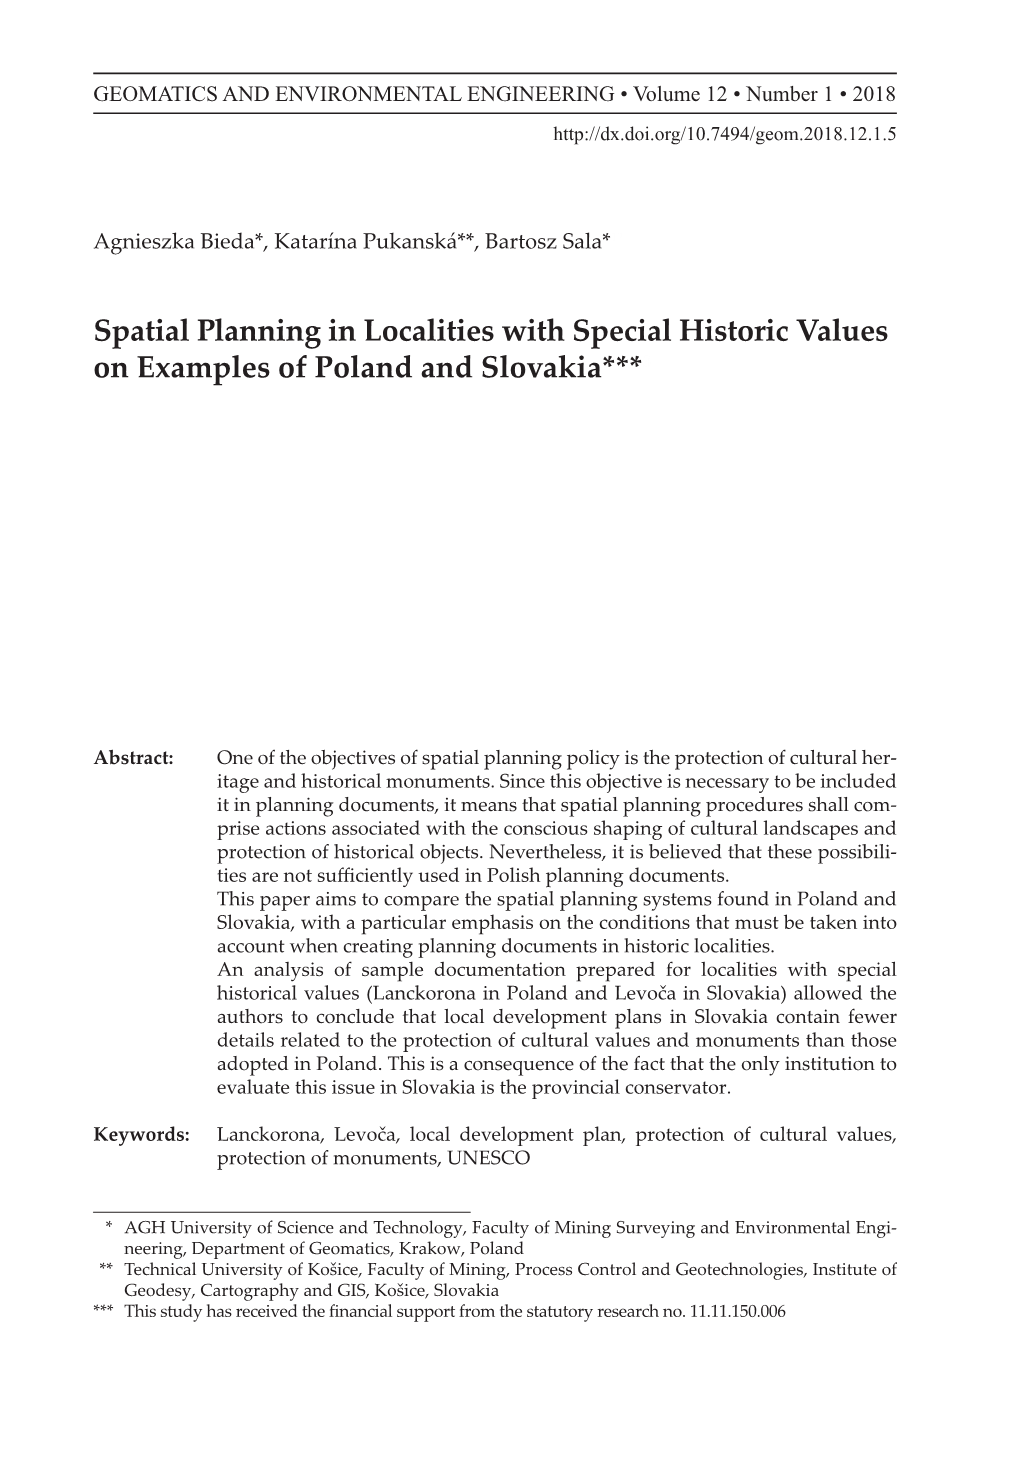 Spatial Planning in Localities with Special Historic Values on Examples of Poland and Slovakia***3